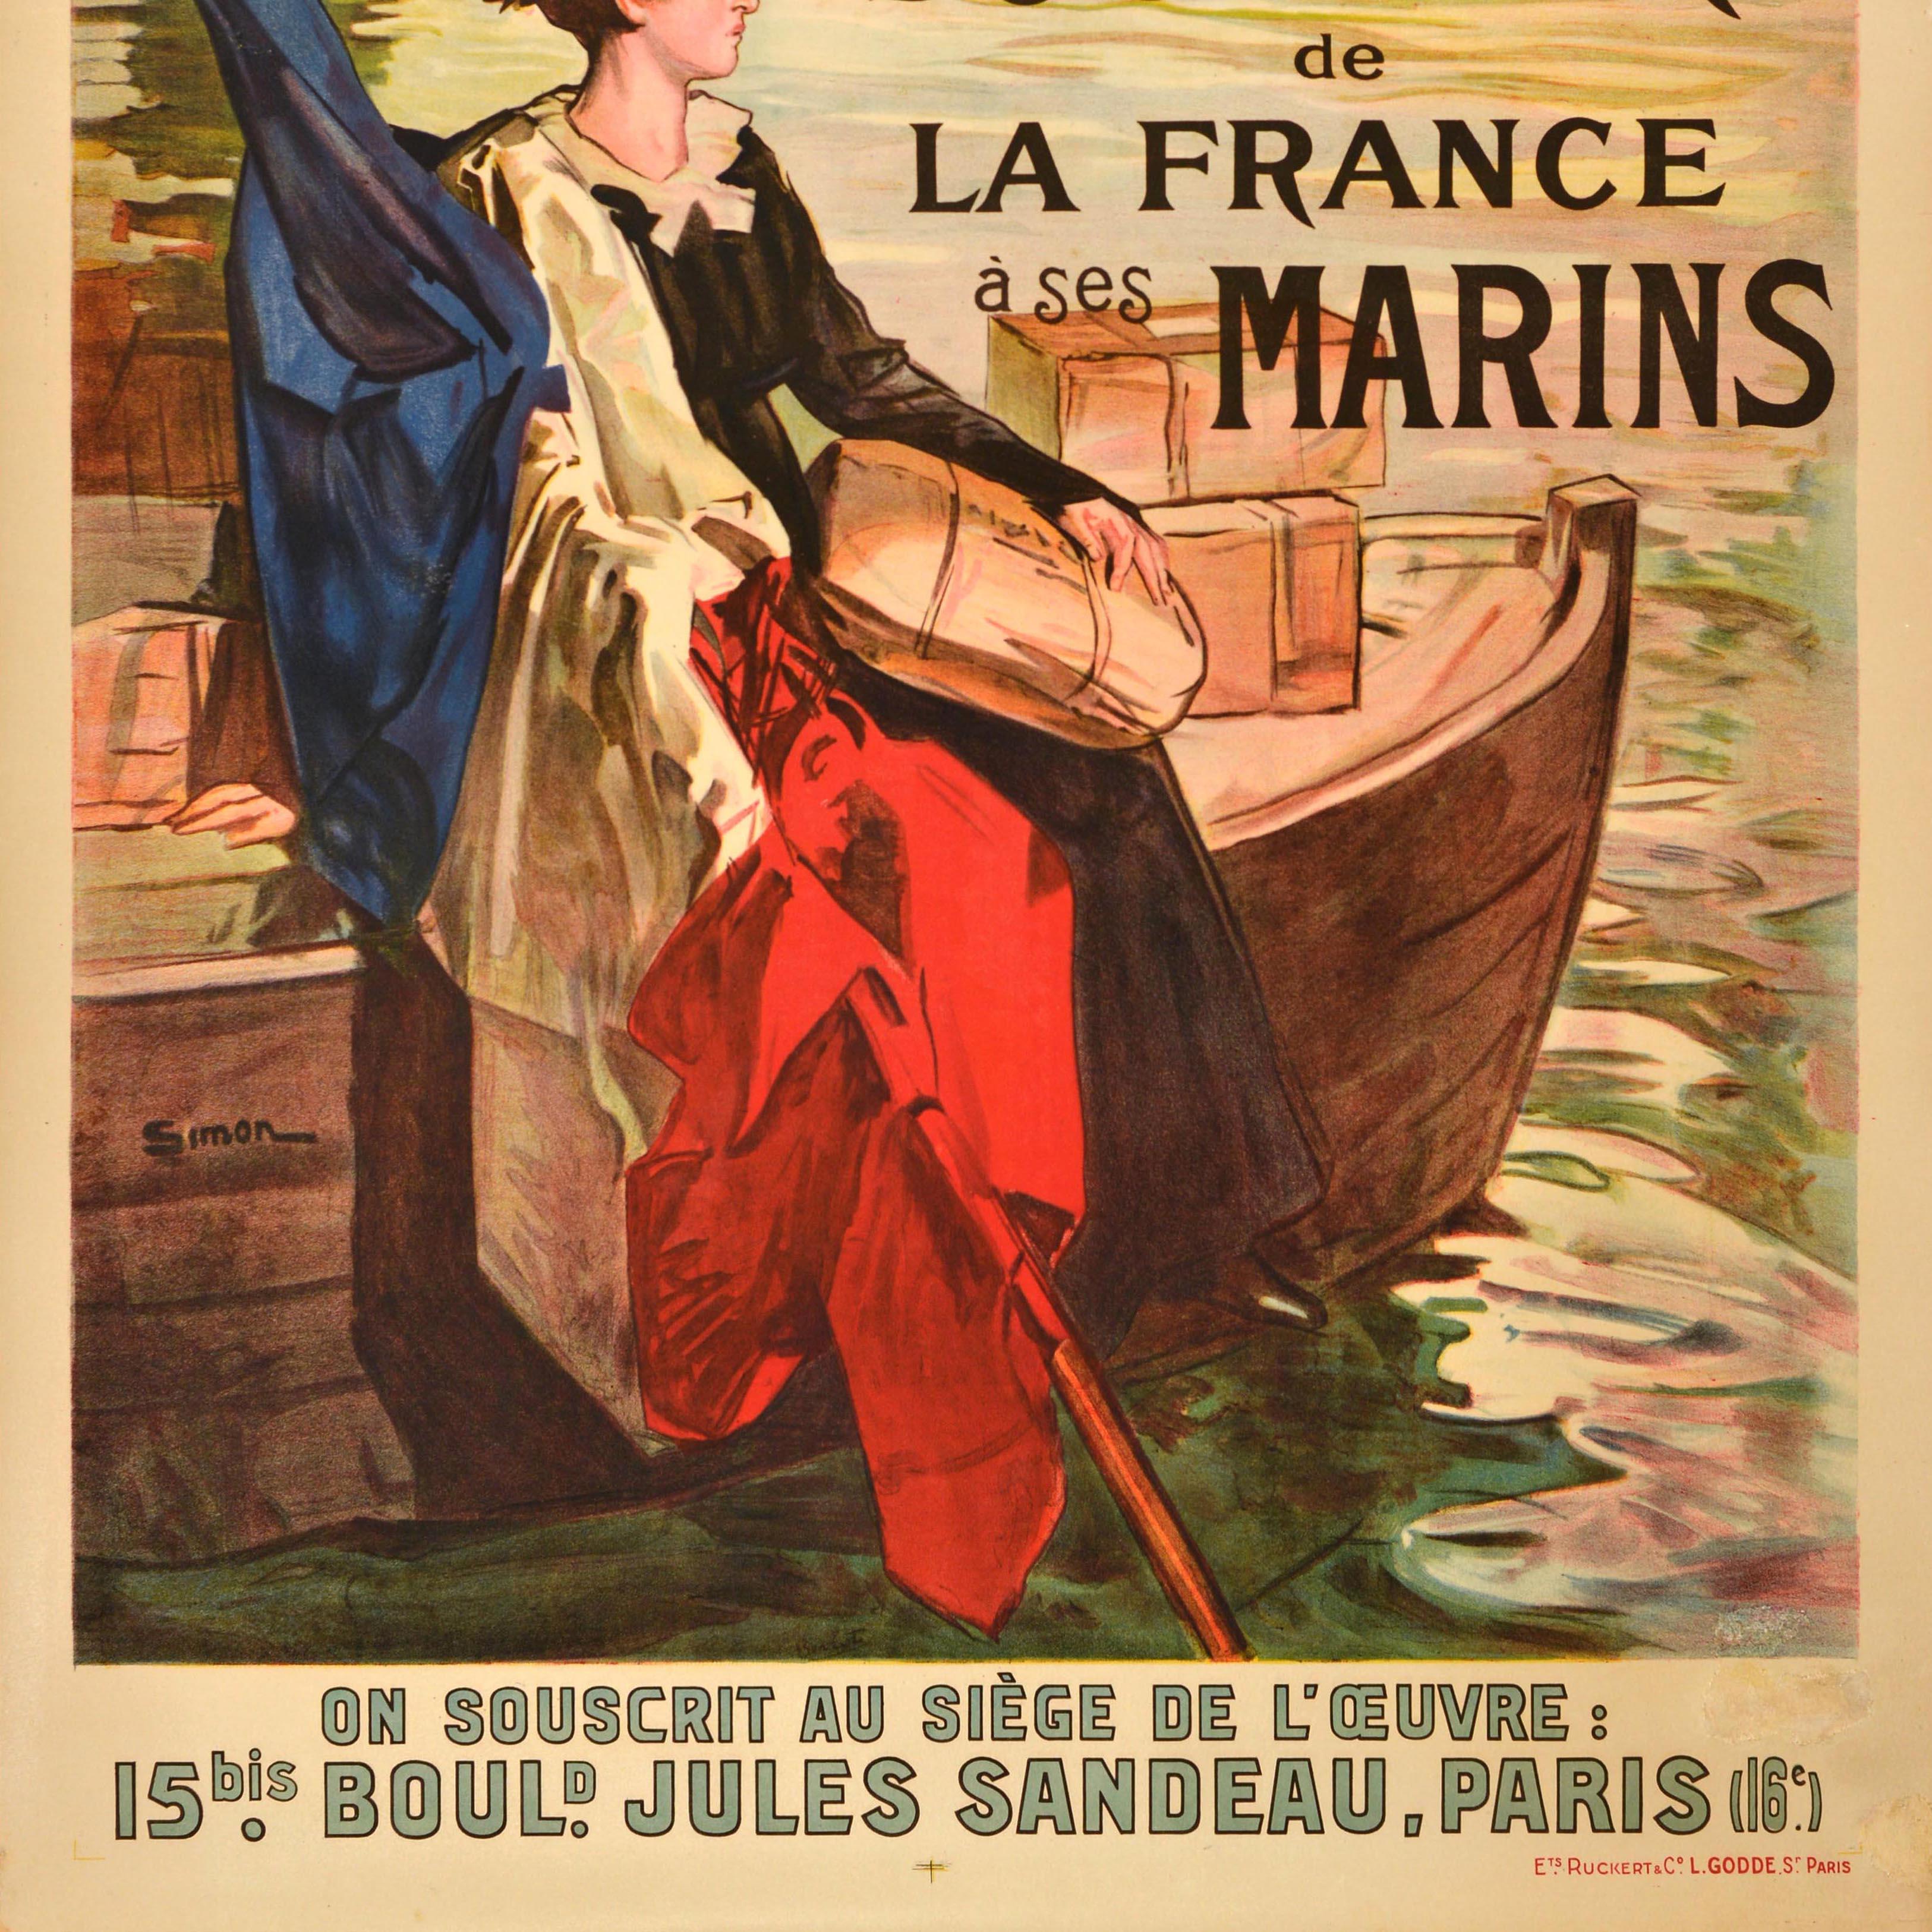 Original antique fundraising poster commemorating French sailors and promoting donations - Donnes tous a l'oeuvre du souvenir de la France a ses Marins / Everyone give to the fund in remembrance of the French sailors - featuring an illustration by